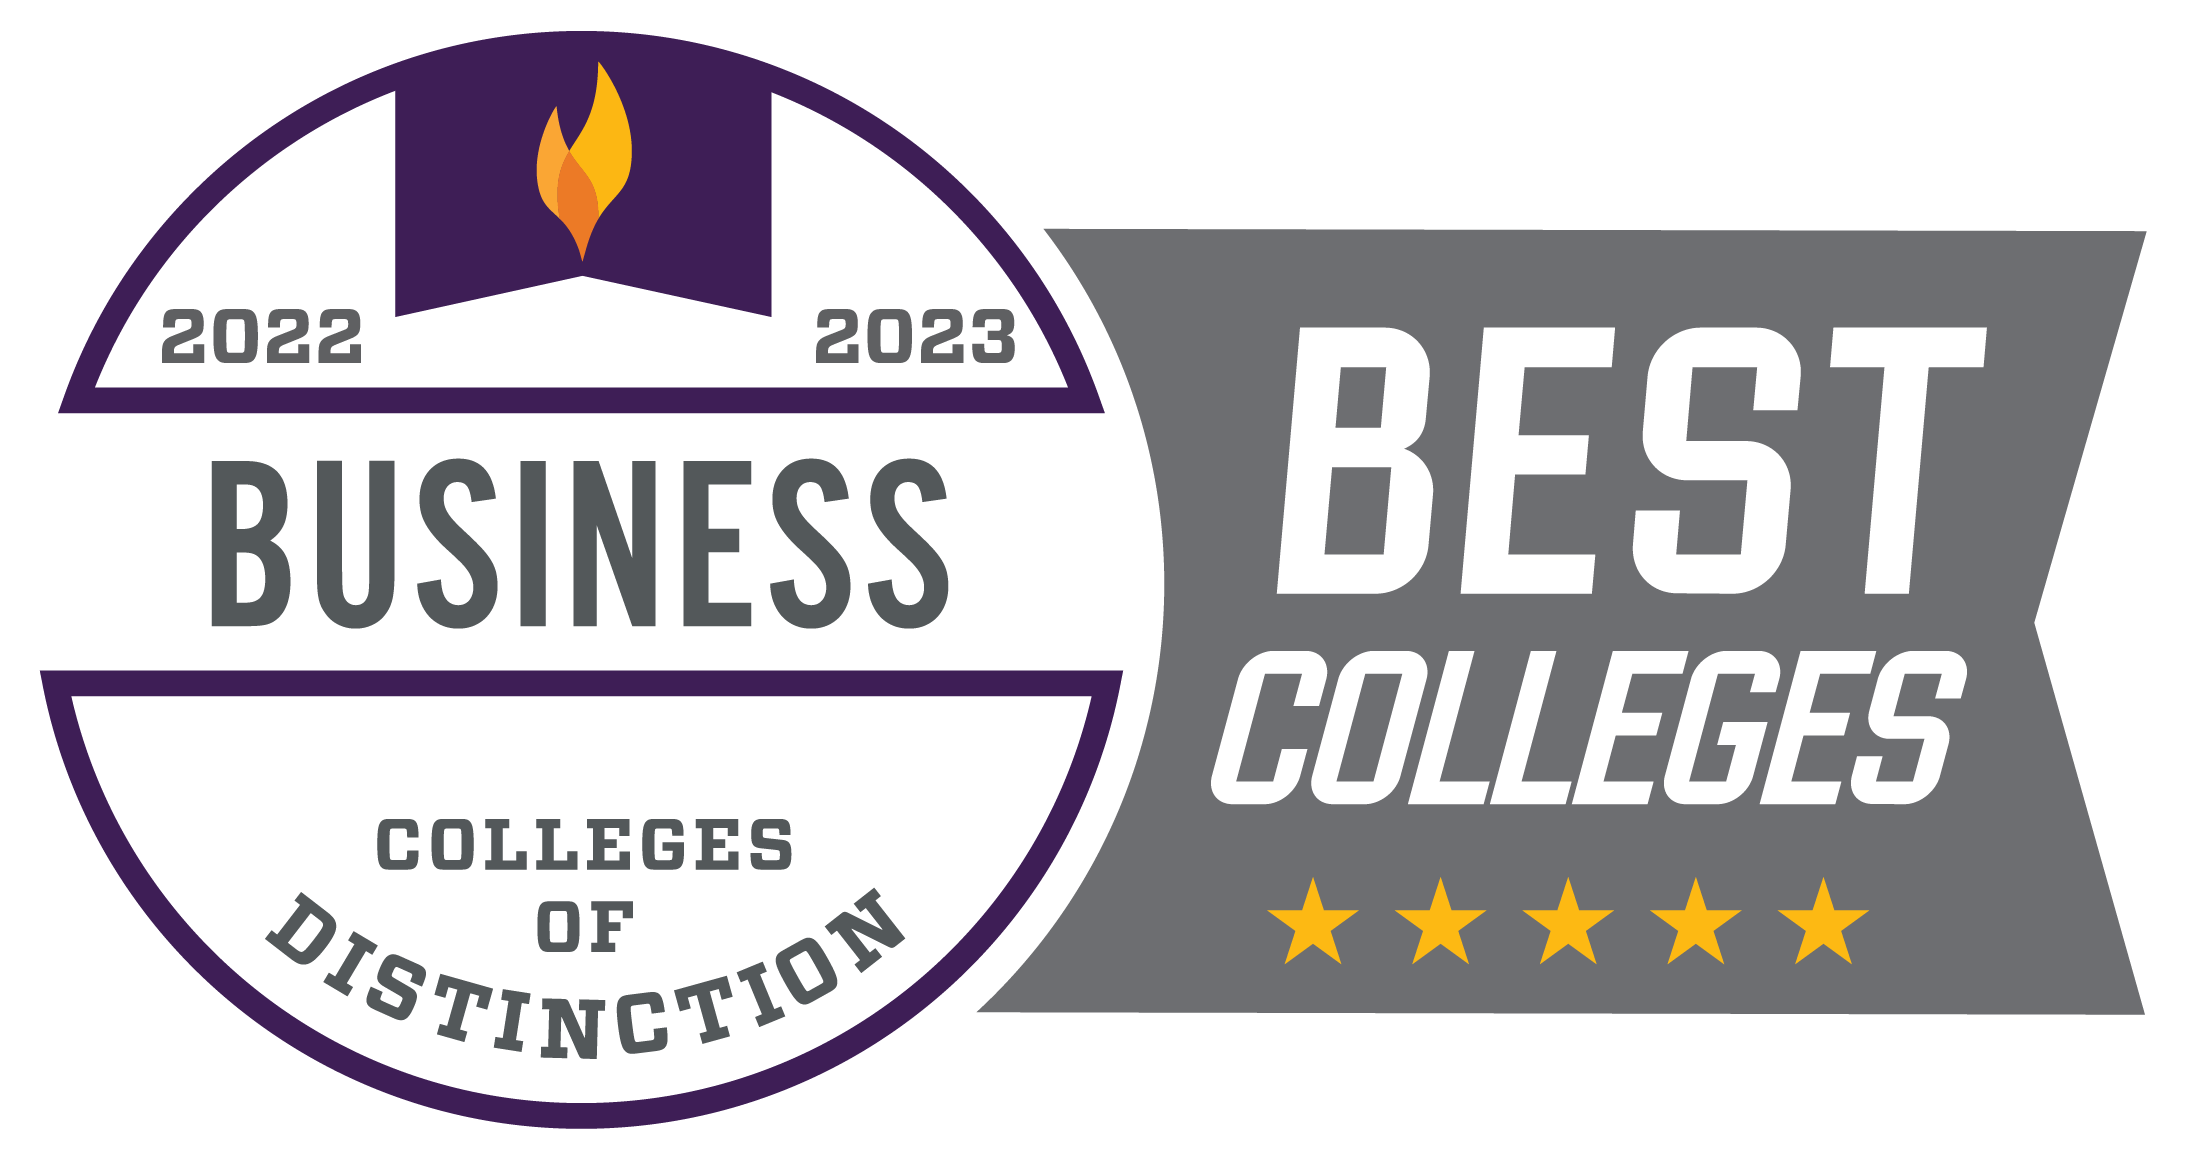 Business Colleges of Distinction badge